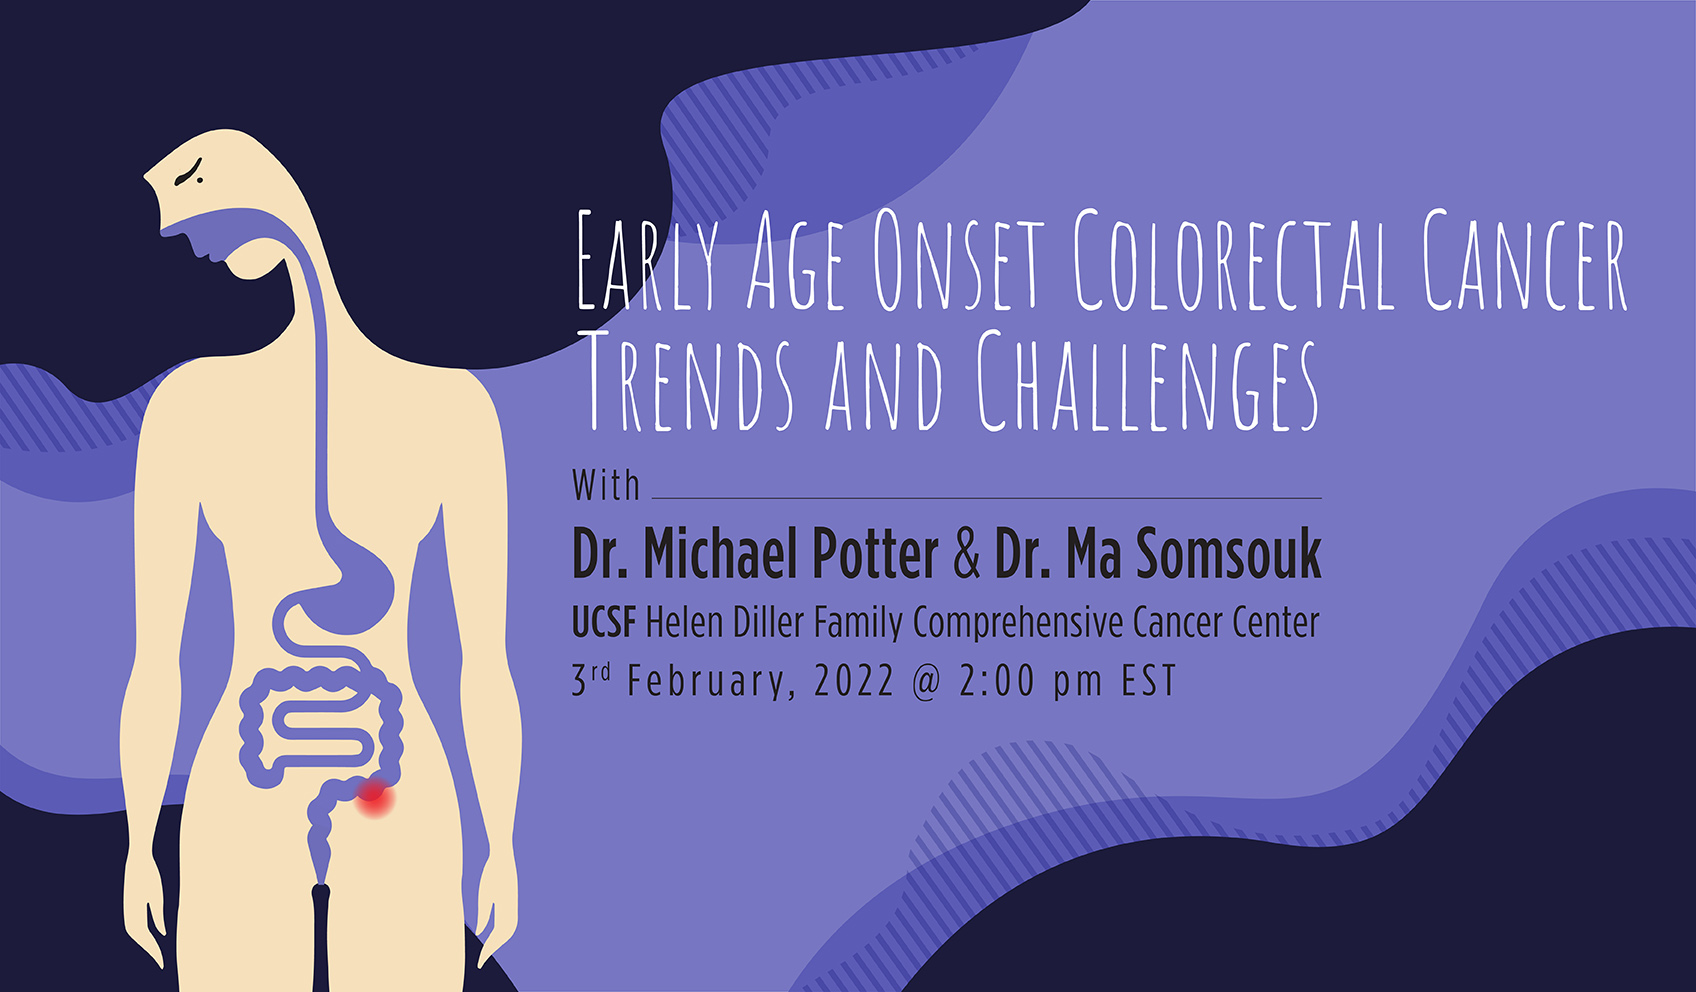 Early Age Onset Colorectal Cancer – Trends and Challenges